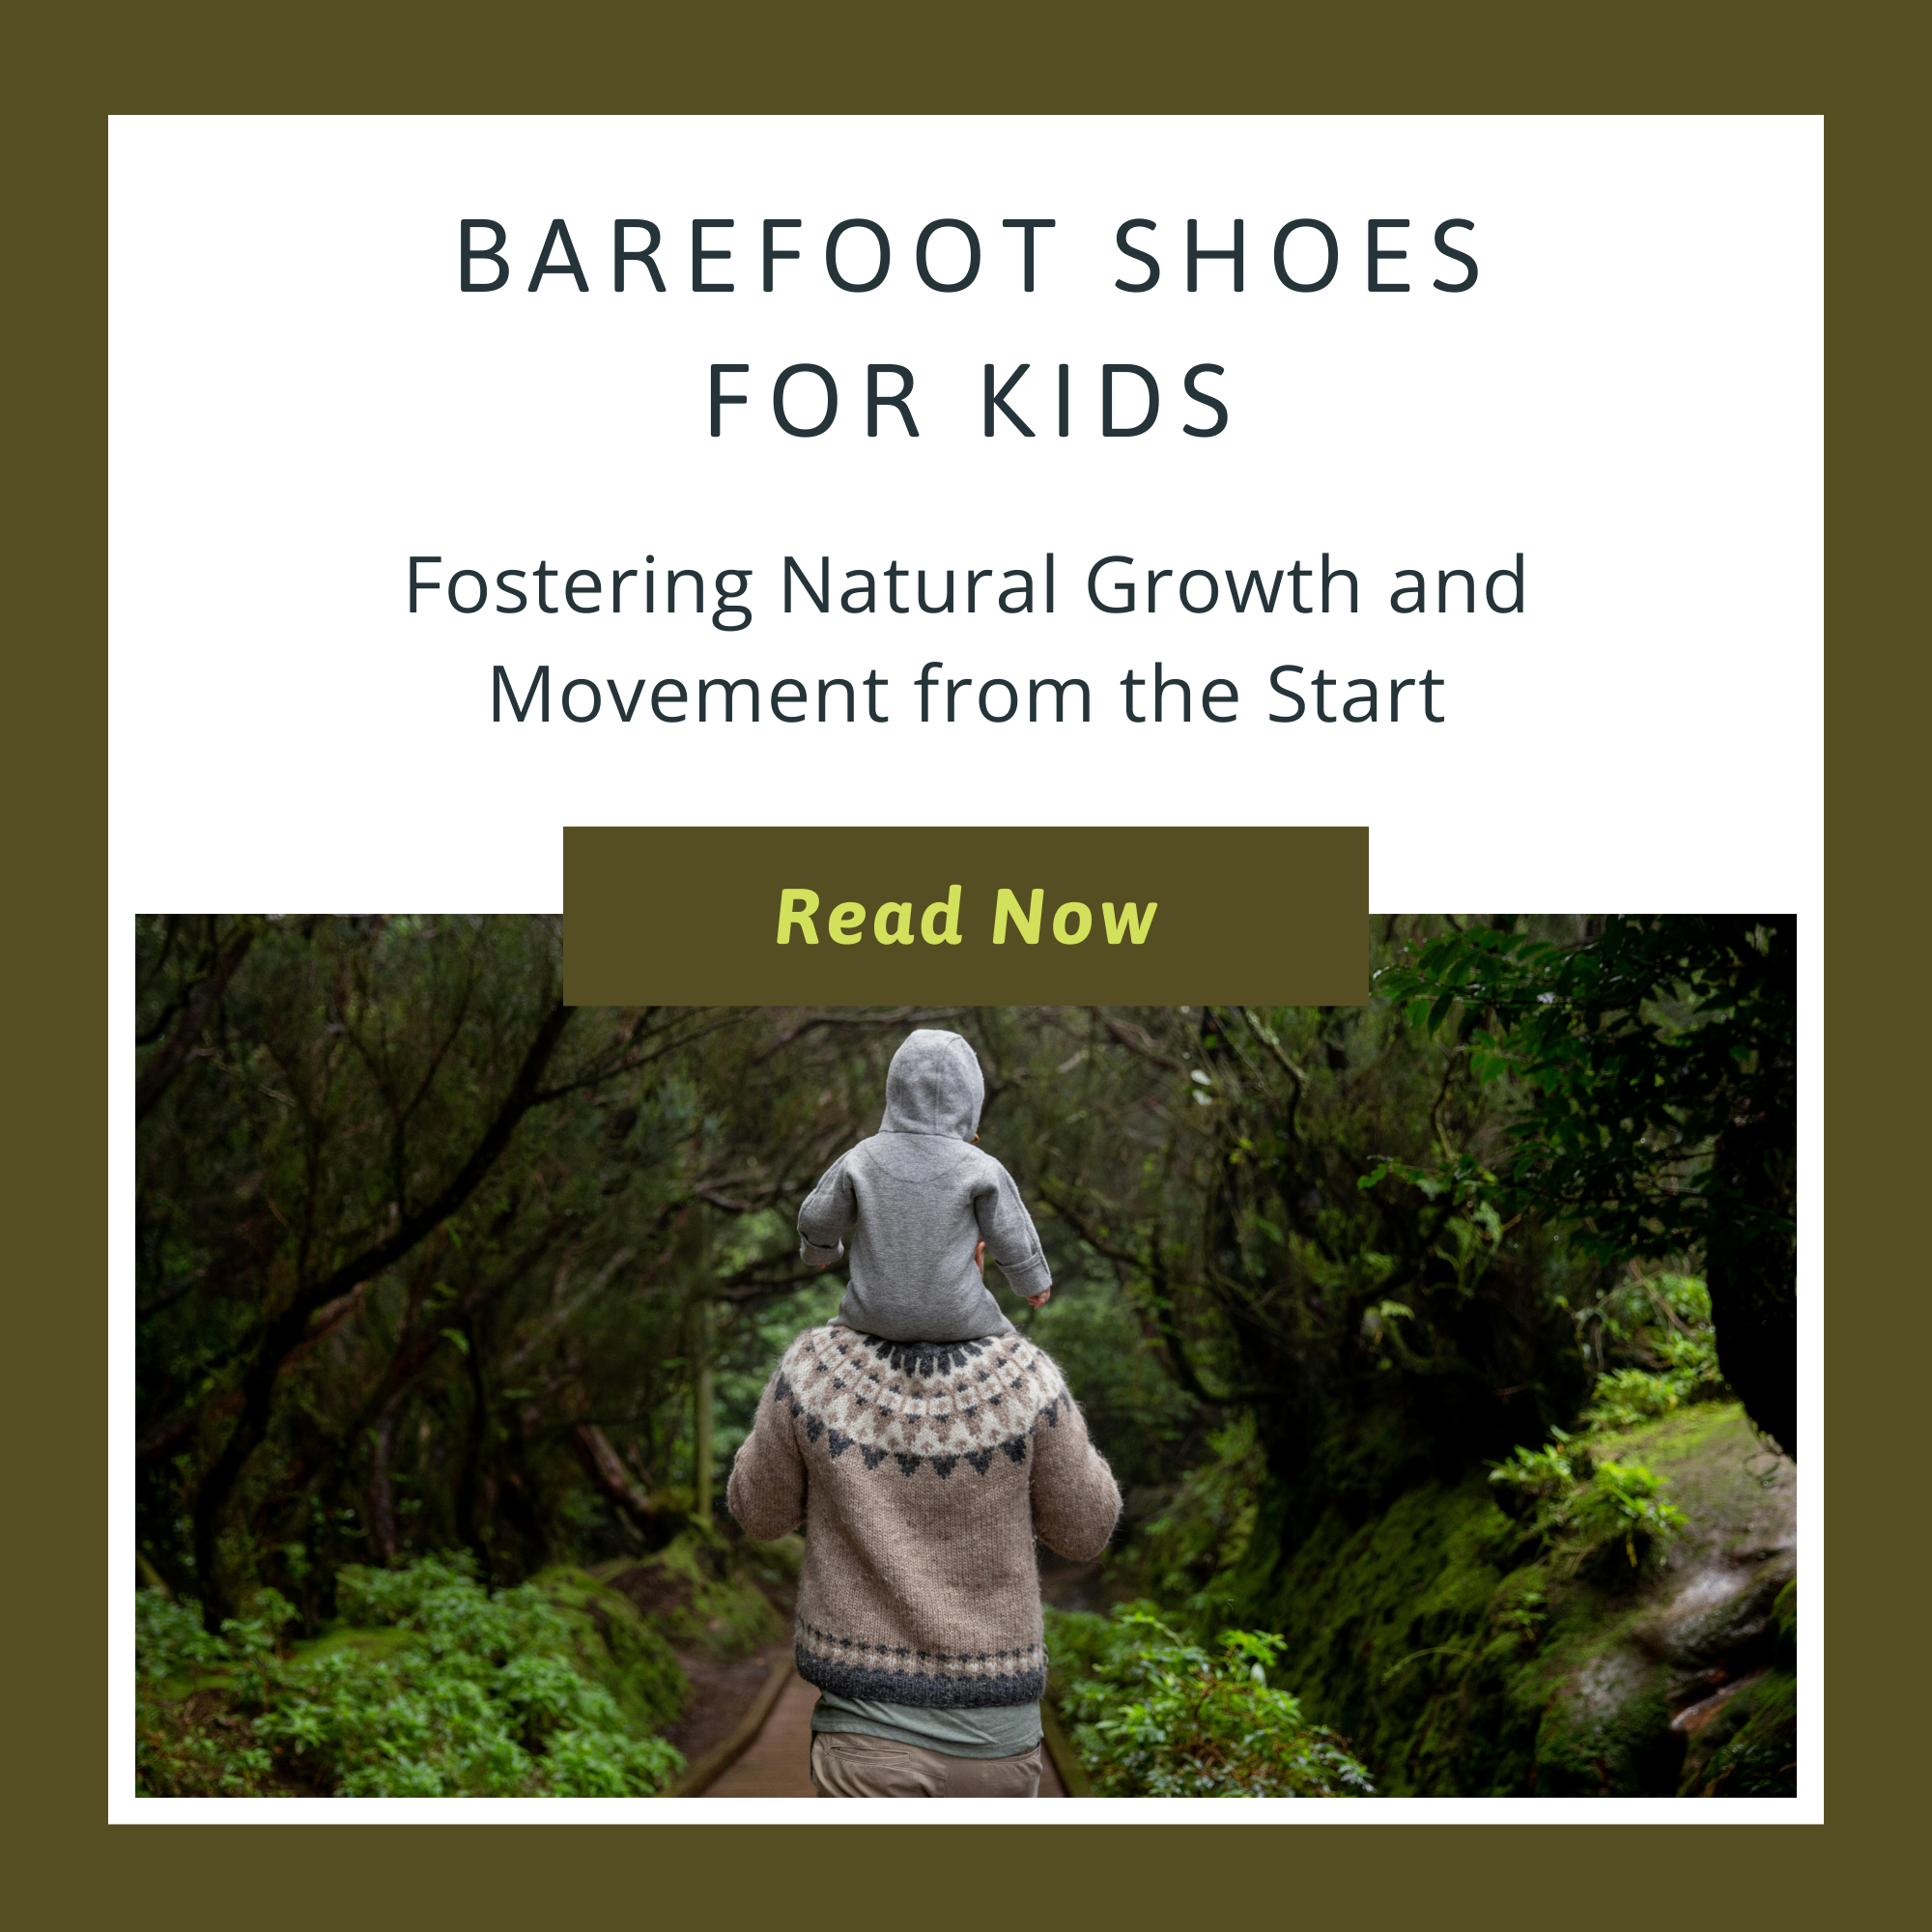 Barefoot Shoes for Kids: Fostering Natural Growth and Movement from the Start